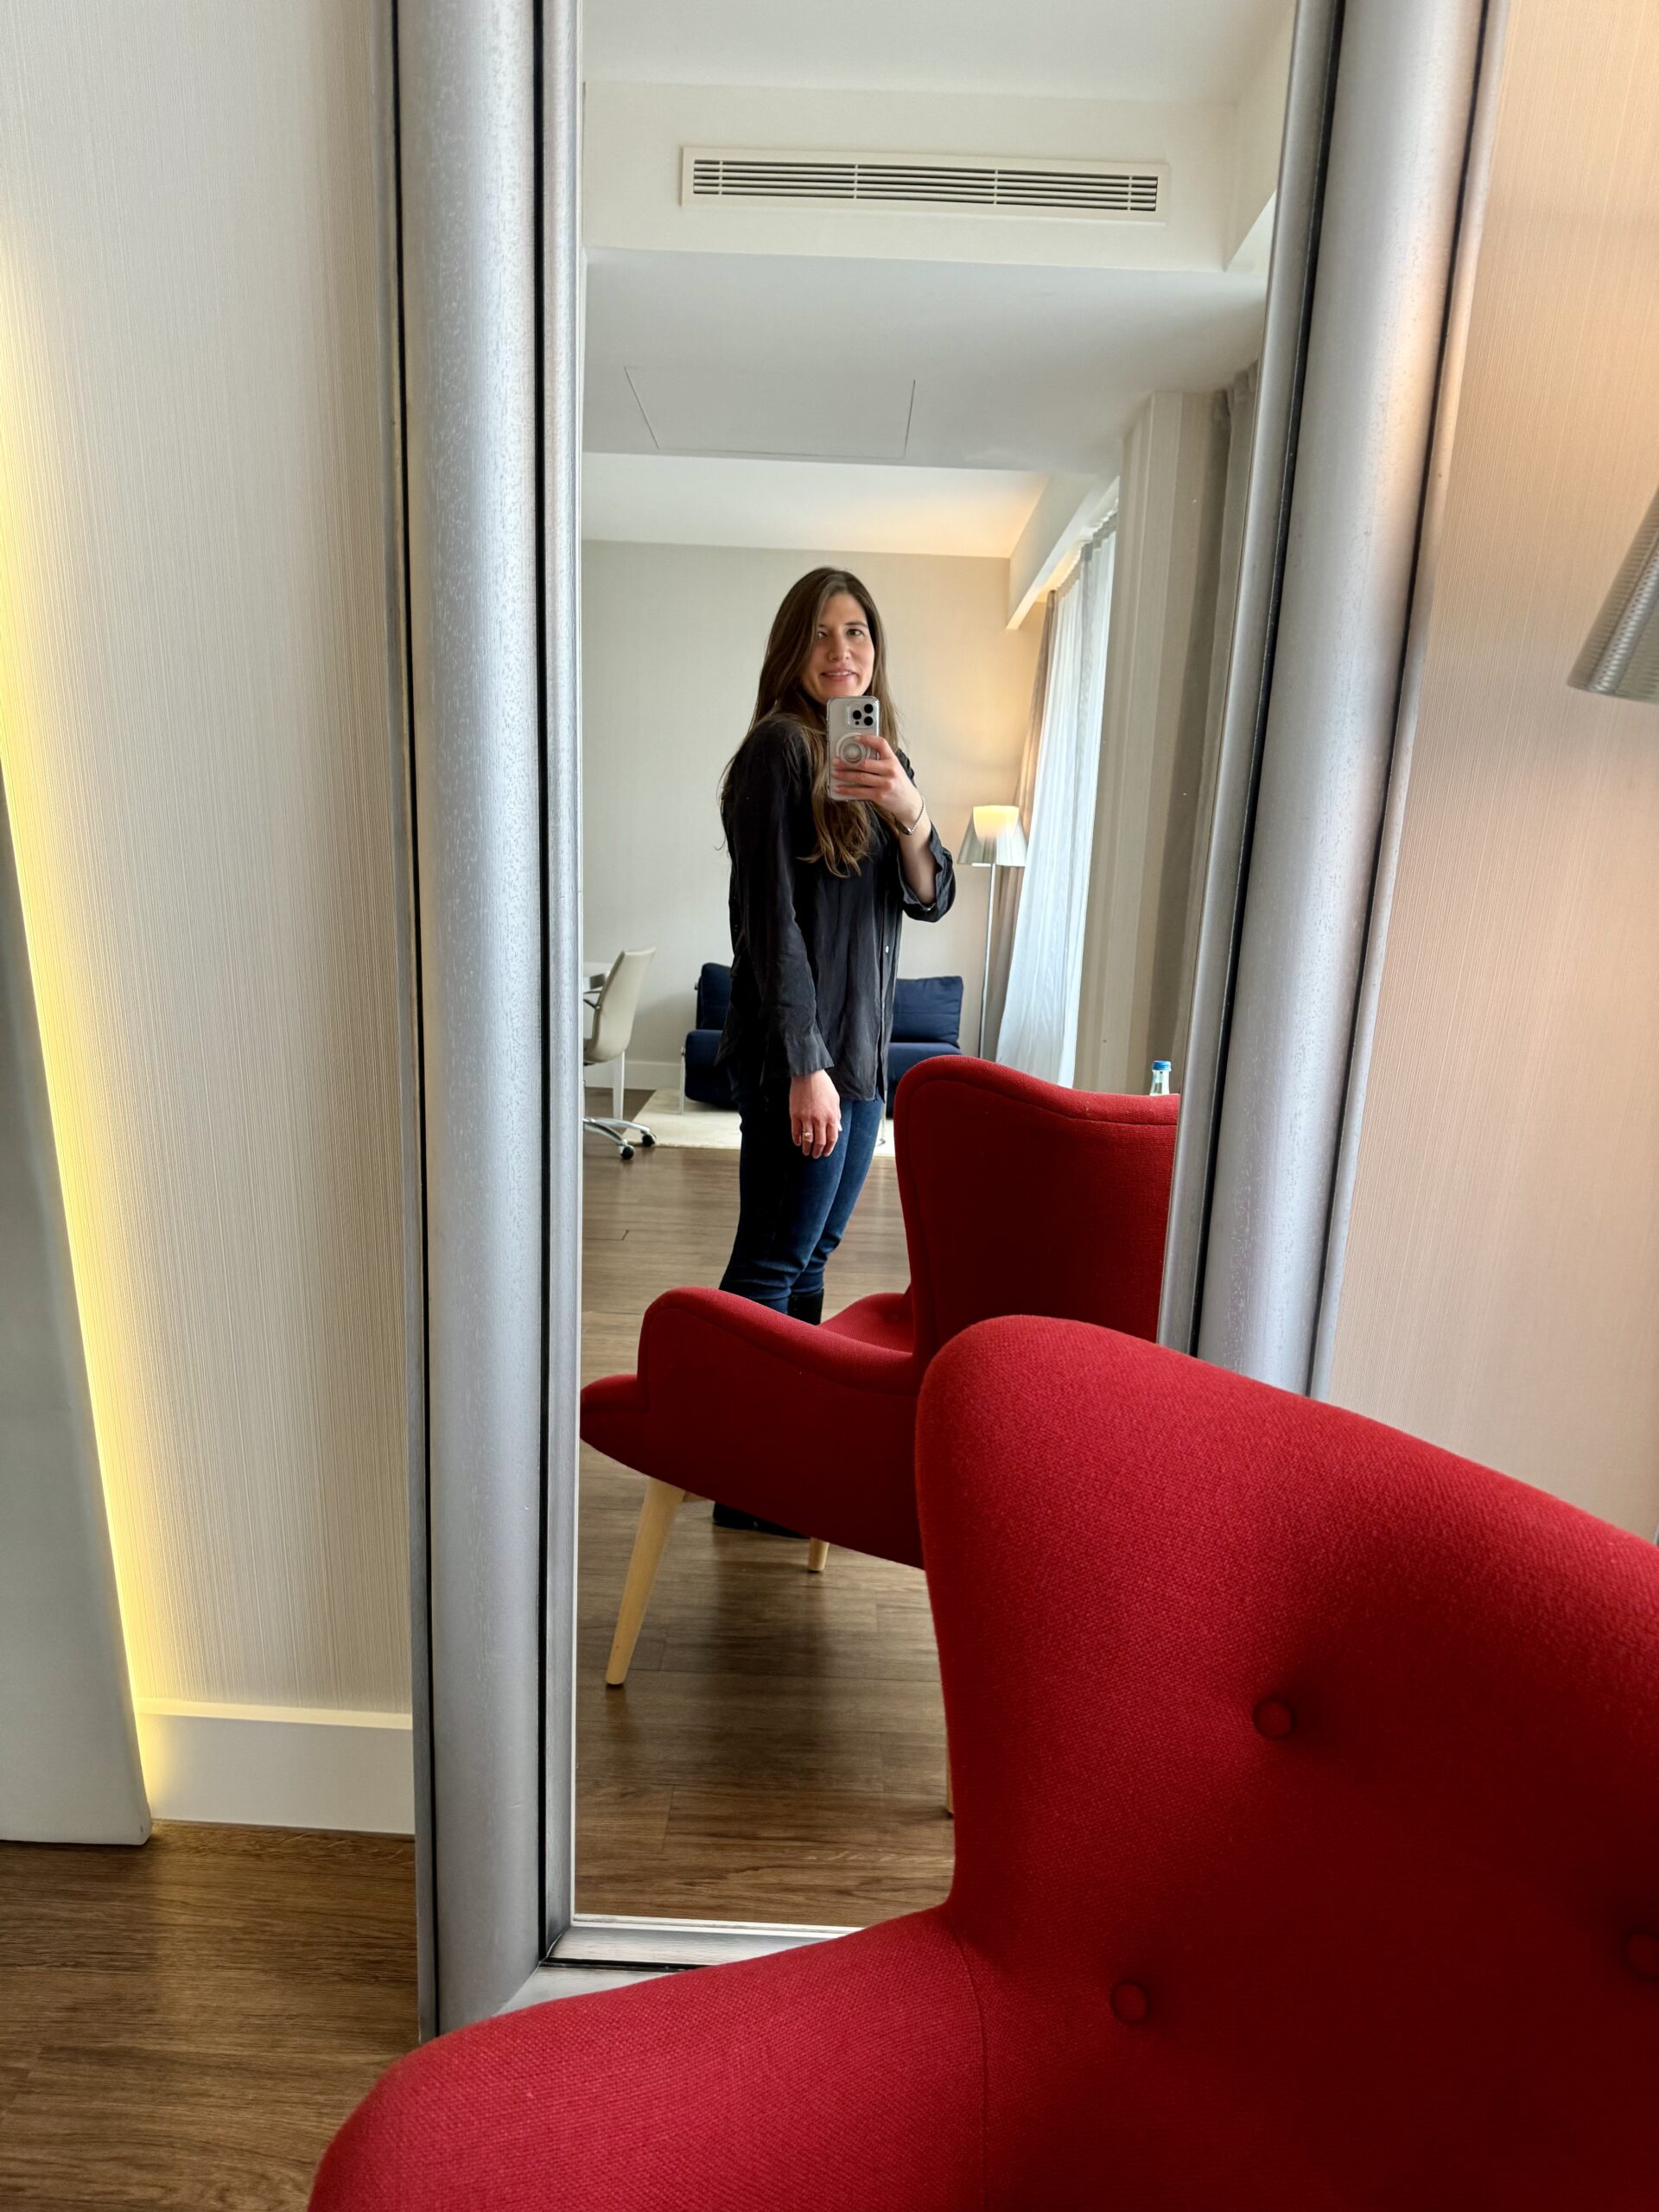 Allie in mirror in hotel room with red chair